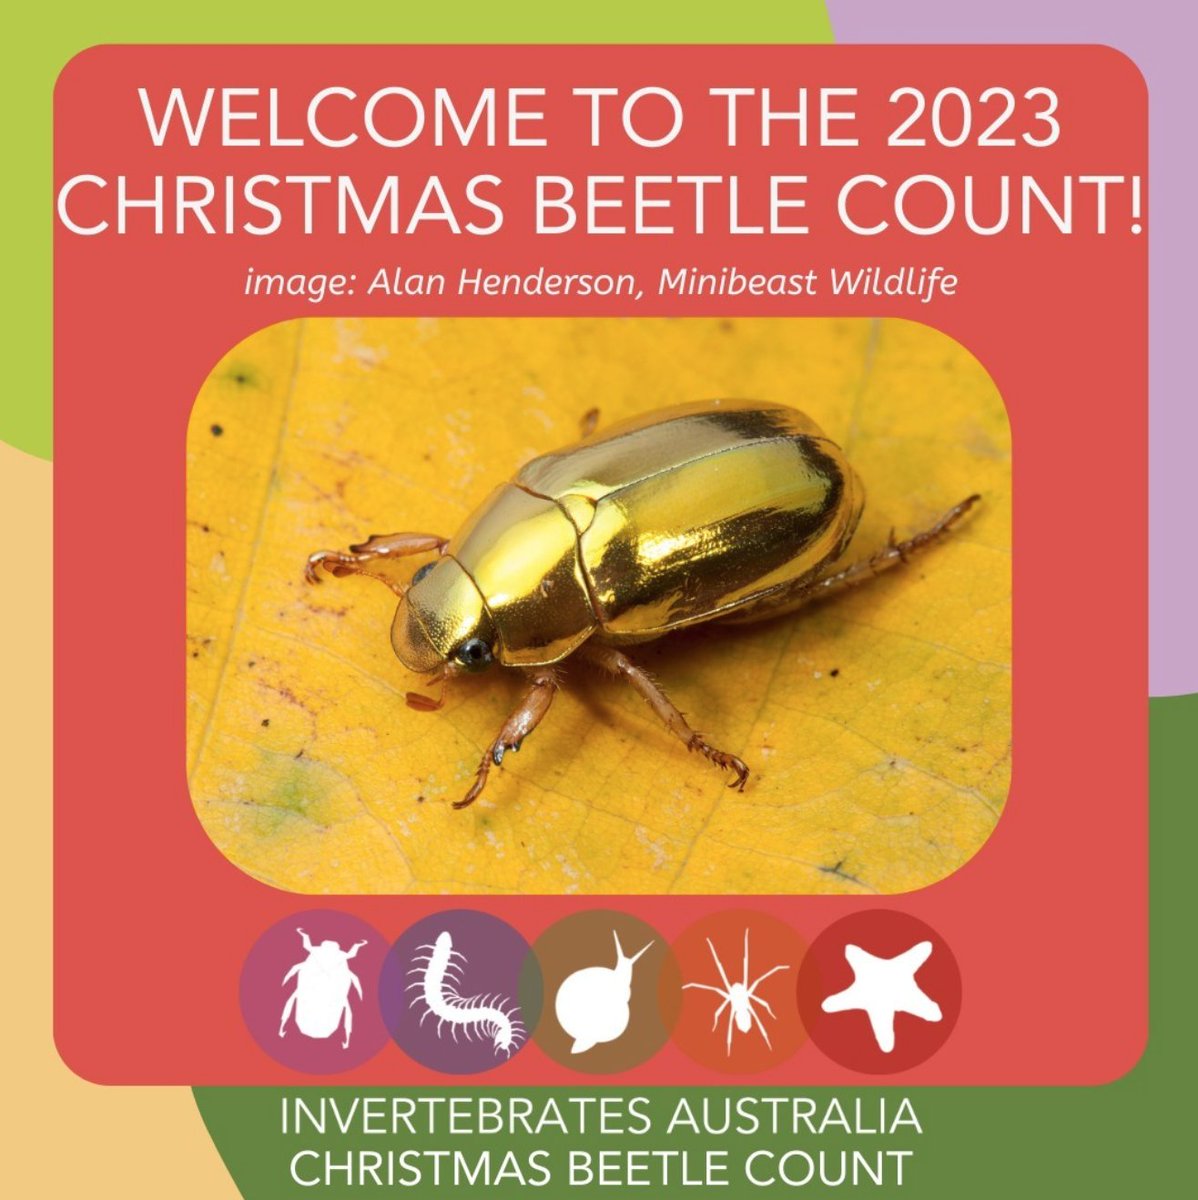 Where are all the Christmas Beetles?
While you're out and about eucalypt-spotting, keep an eye out for gumleaf-loving Christmas Beetles, snap a photo and upload your sightings to the @invertsau #ChristmasBeetleCount on @inaturalist: invertebratesaustralia.org/christmasbeetl…